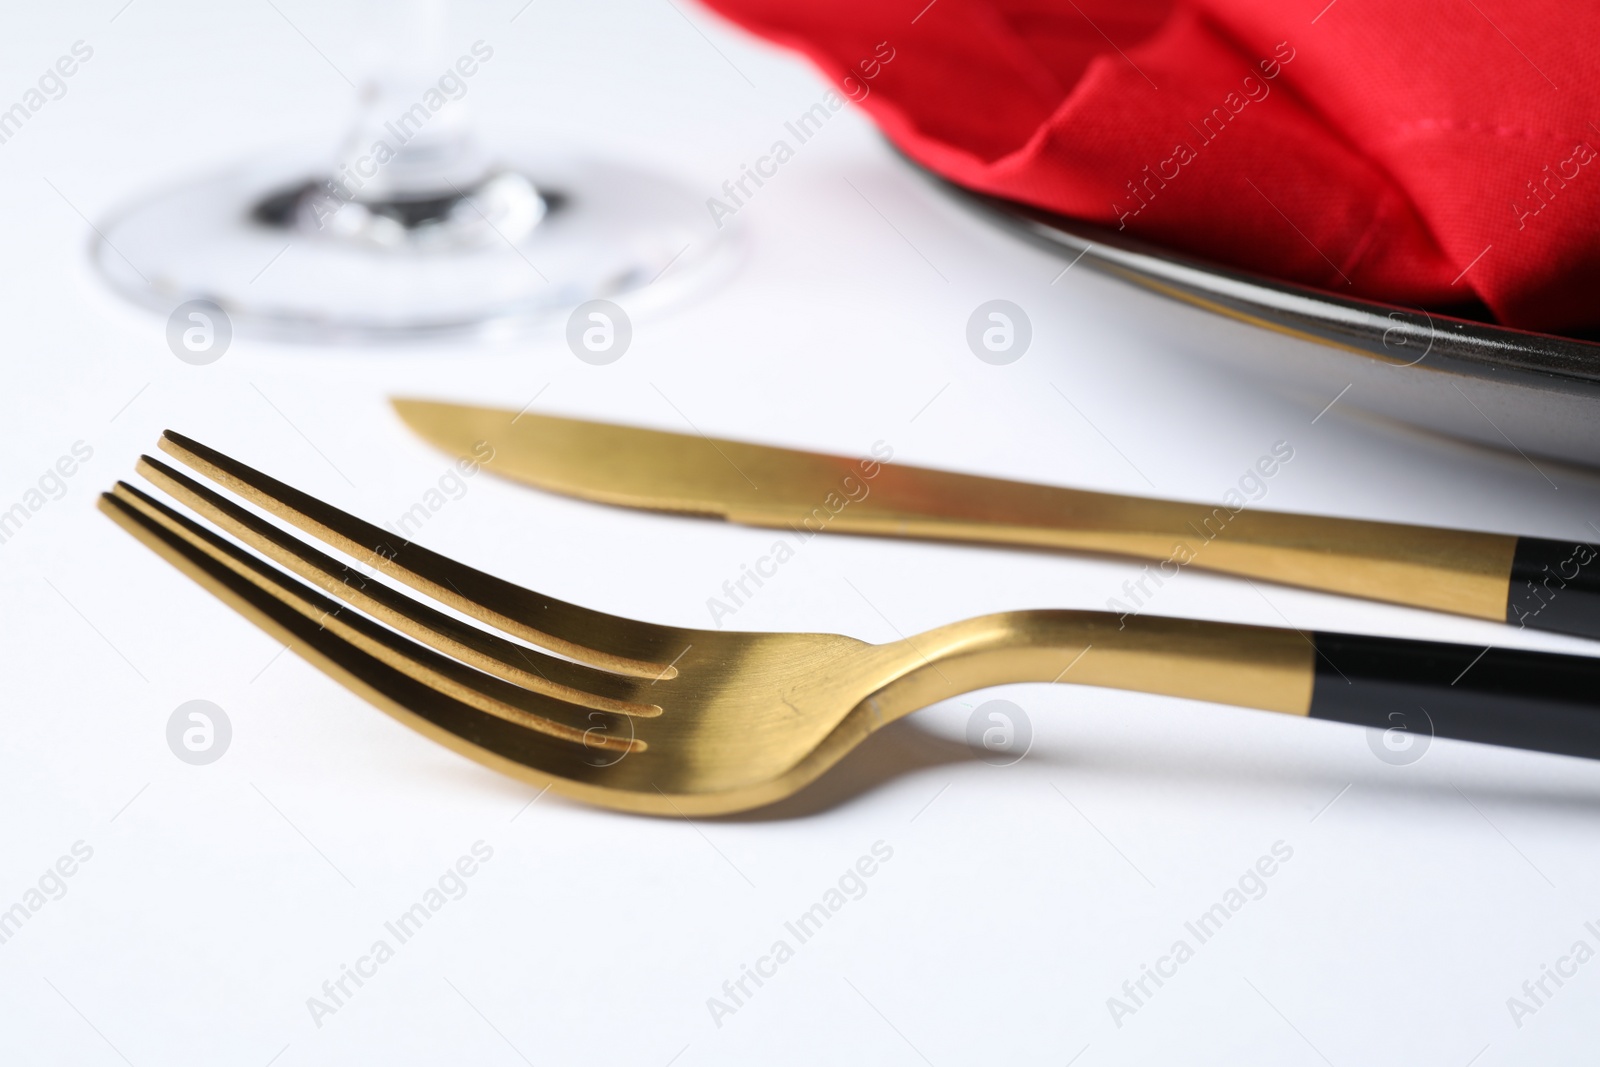 Photo of Golden cutlery near plate on white table, closeup